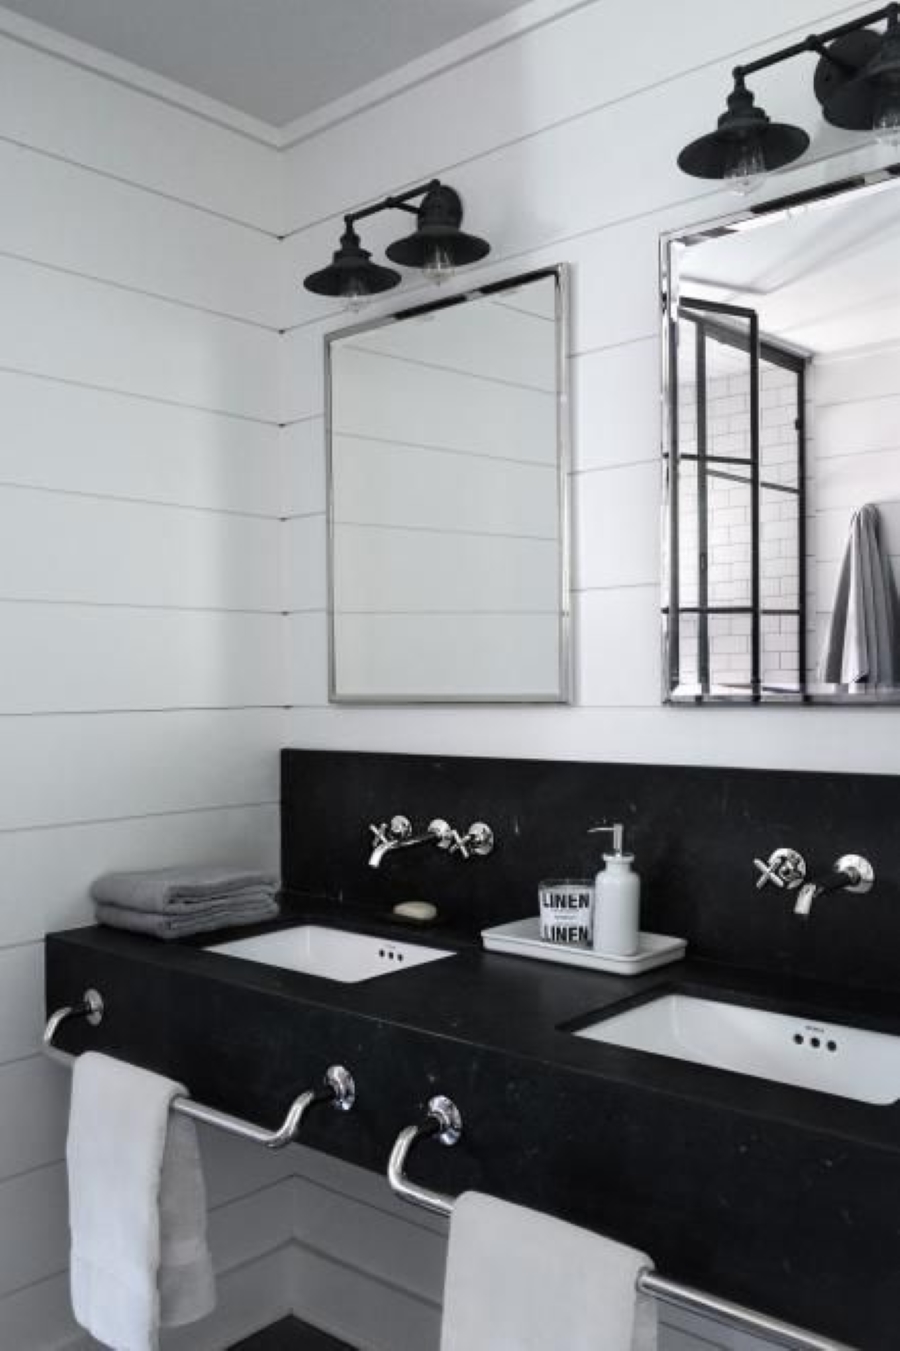 5 Amazing Master Bathroom Ideas for a Unique Makeover - Classic Turn-of-Century Cottage Style home inspiration ideas